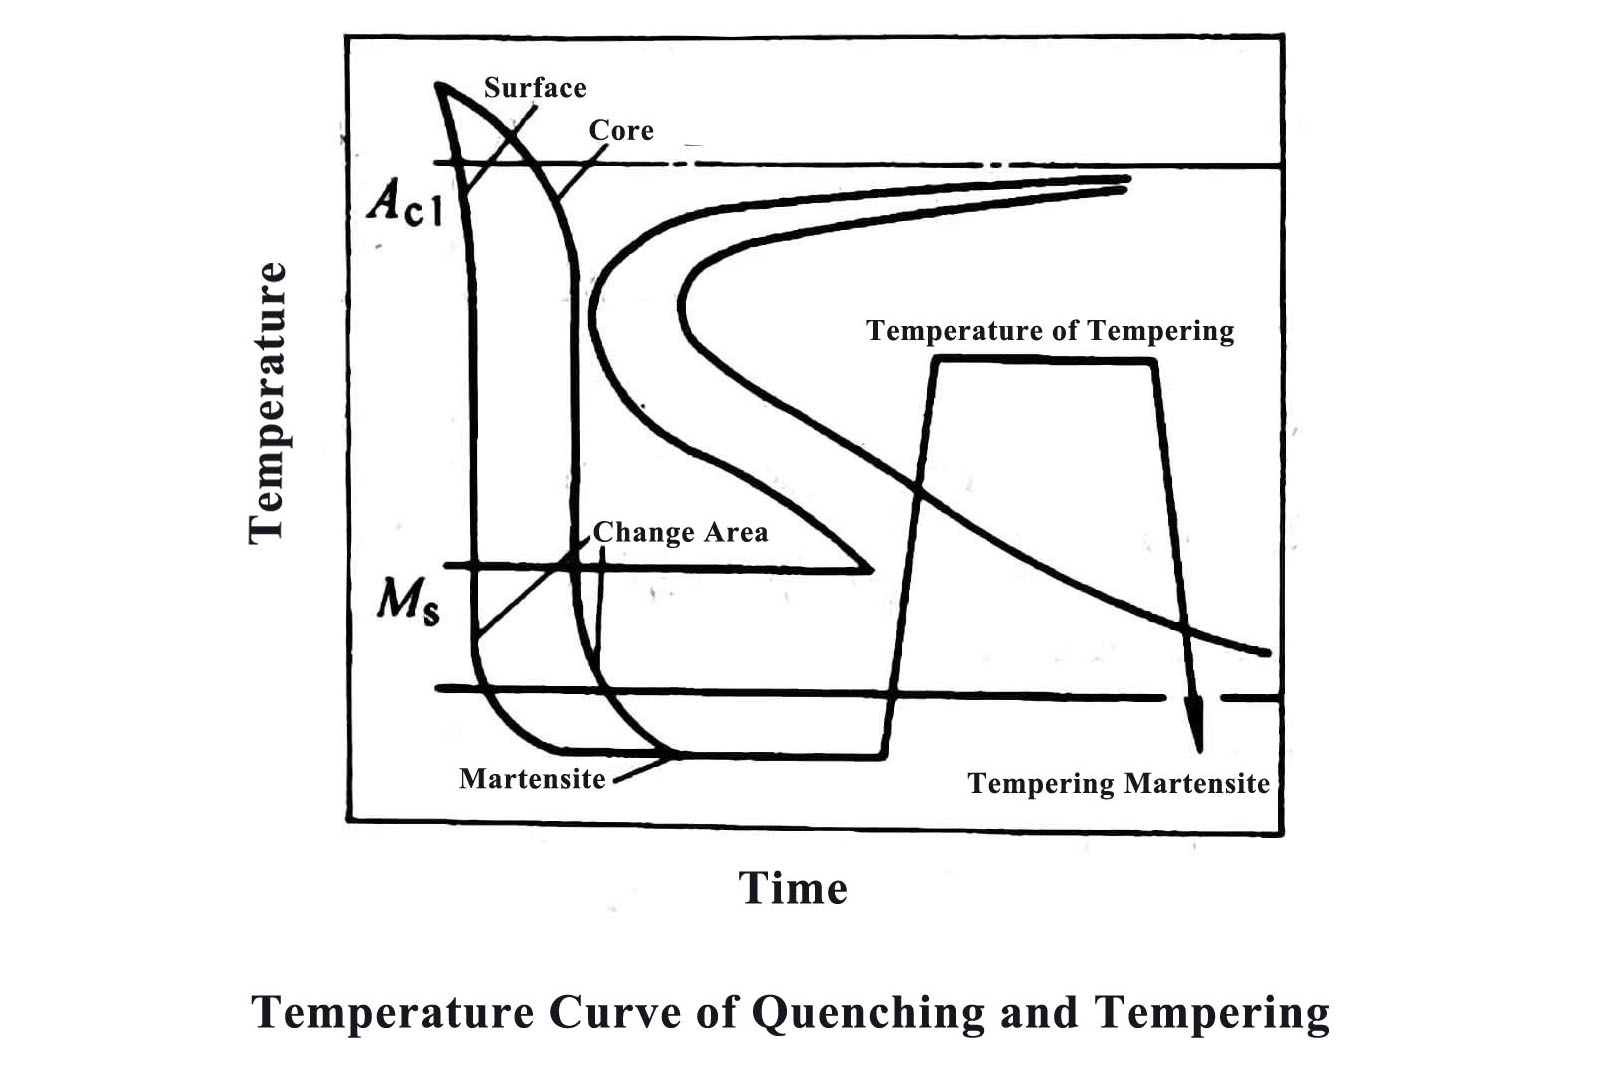 Surface Heat Treatment of Steel Castings